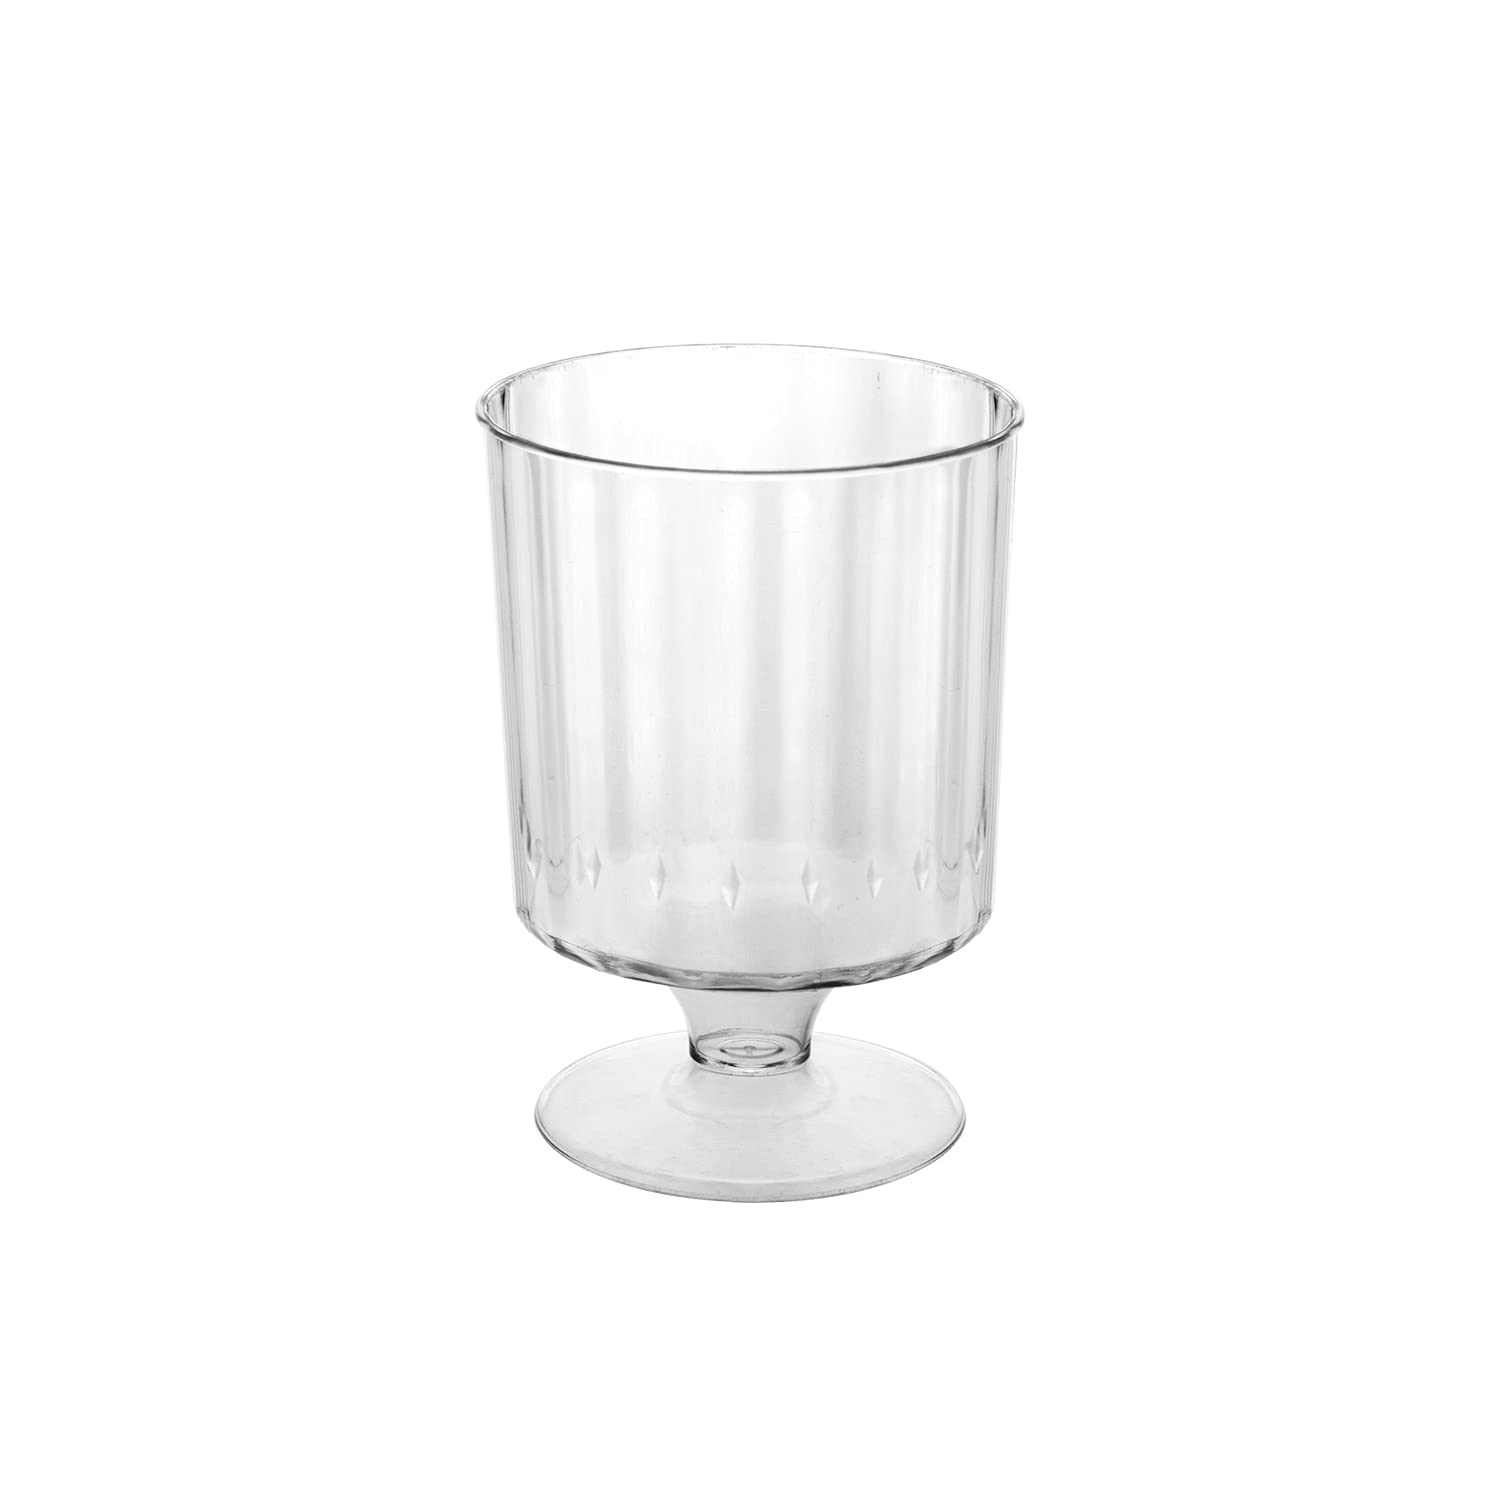 Party Essentials Hard Plastic Two Piece 5.5-Ounce Wine Glasses, Clear, Pack  of 20